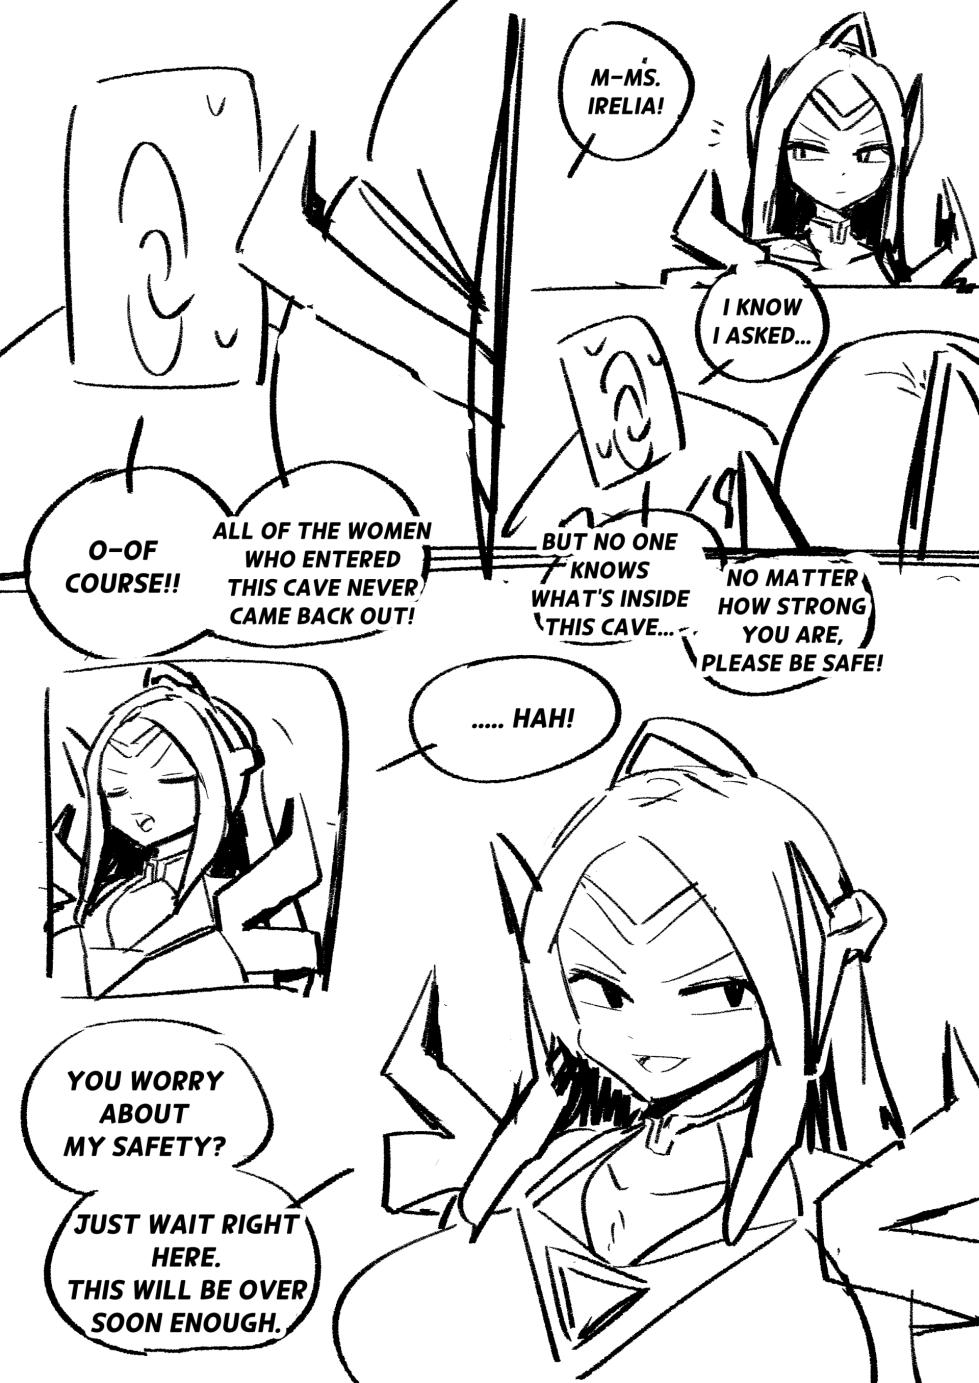 [Woomochichi] Irelia Personality Excretion (League of Legends) - Page 2